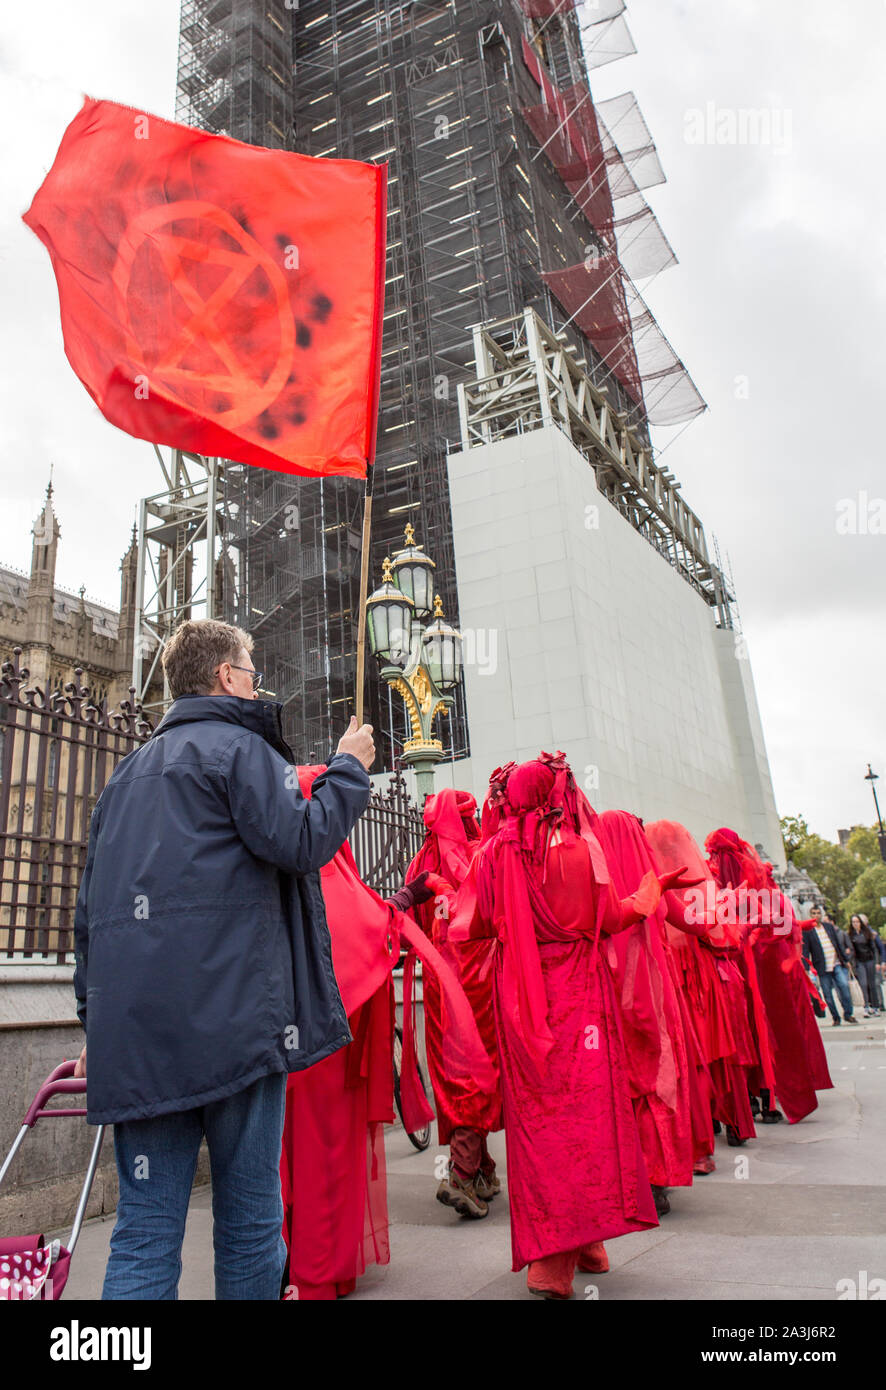 London, UK. 08th Oct, 2019. Environmentalist performance art troupe the 'Red Rebel Brigade' walk silently during the environmental protest by Extinction Rebellion activist group.Extinction Rebellion is an international movement that uses non-violent civil disobedience in an attempt to halt mass extinction and minimise the risk of social collapse. The group has blocked a number of key junctions in central London. Credit: SOPA Images Limited/Alamy Live News Stock Photo